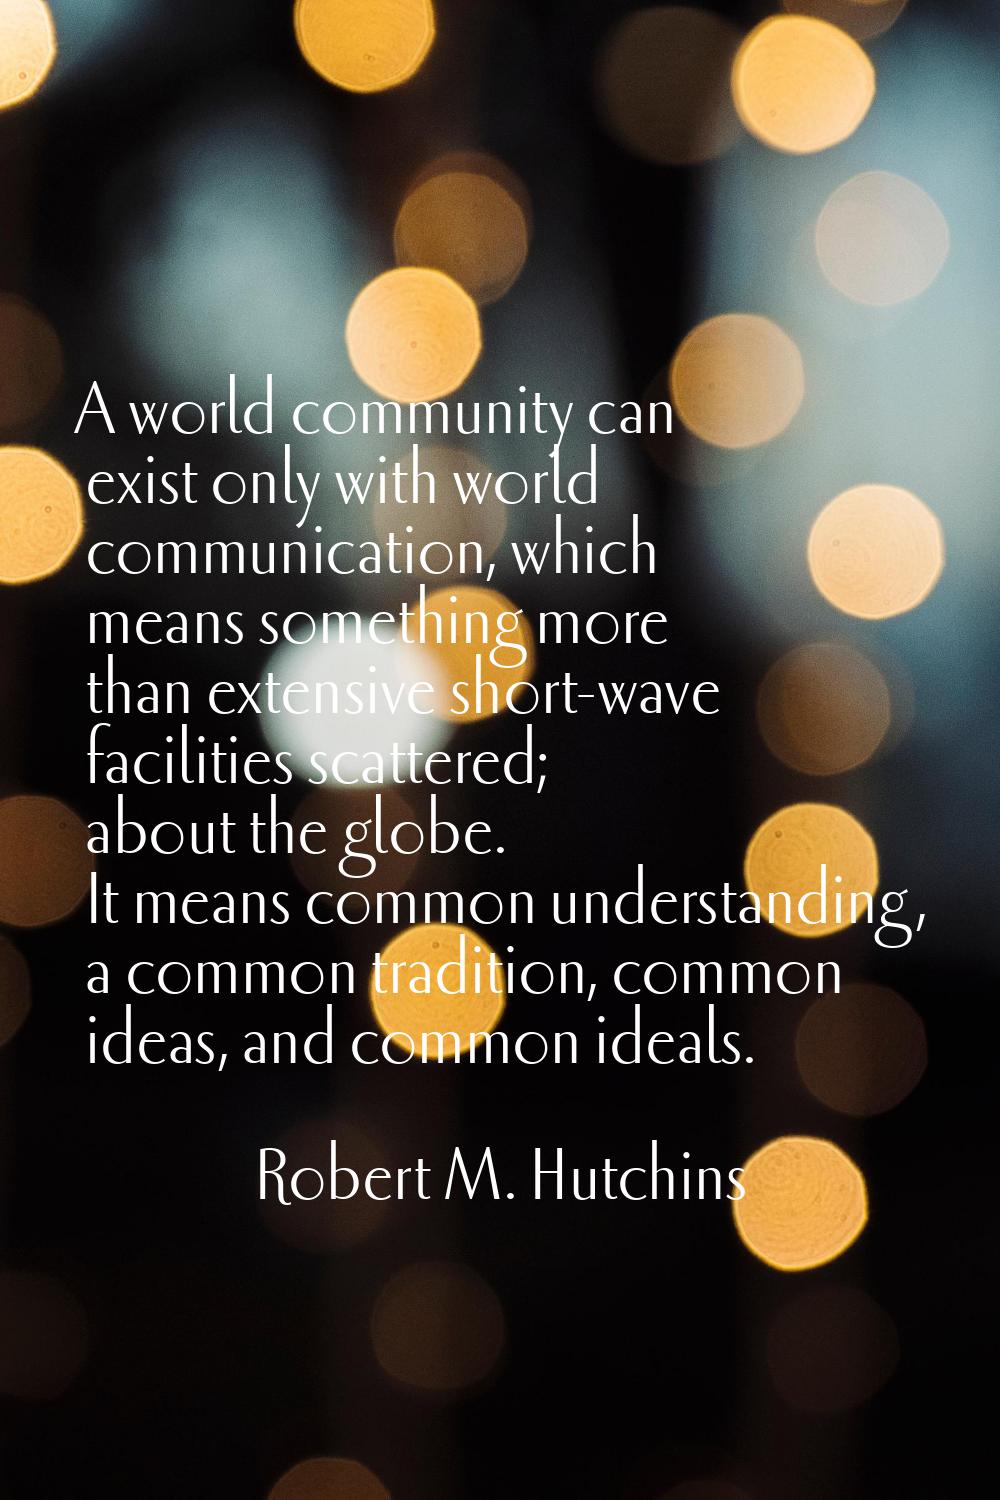 A world community can exist only with world communication, which means something more than extensiv